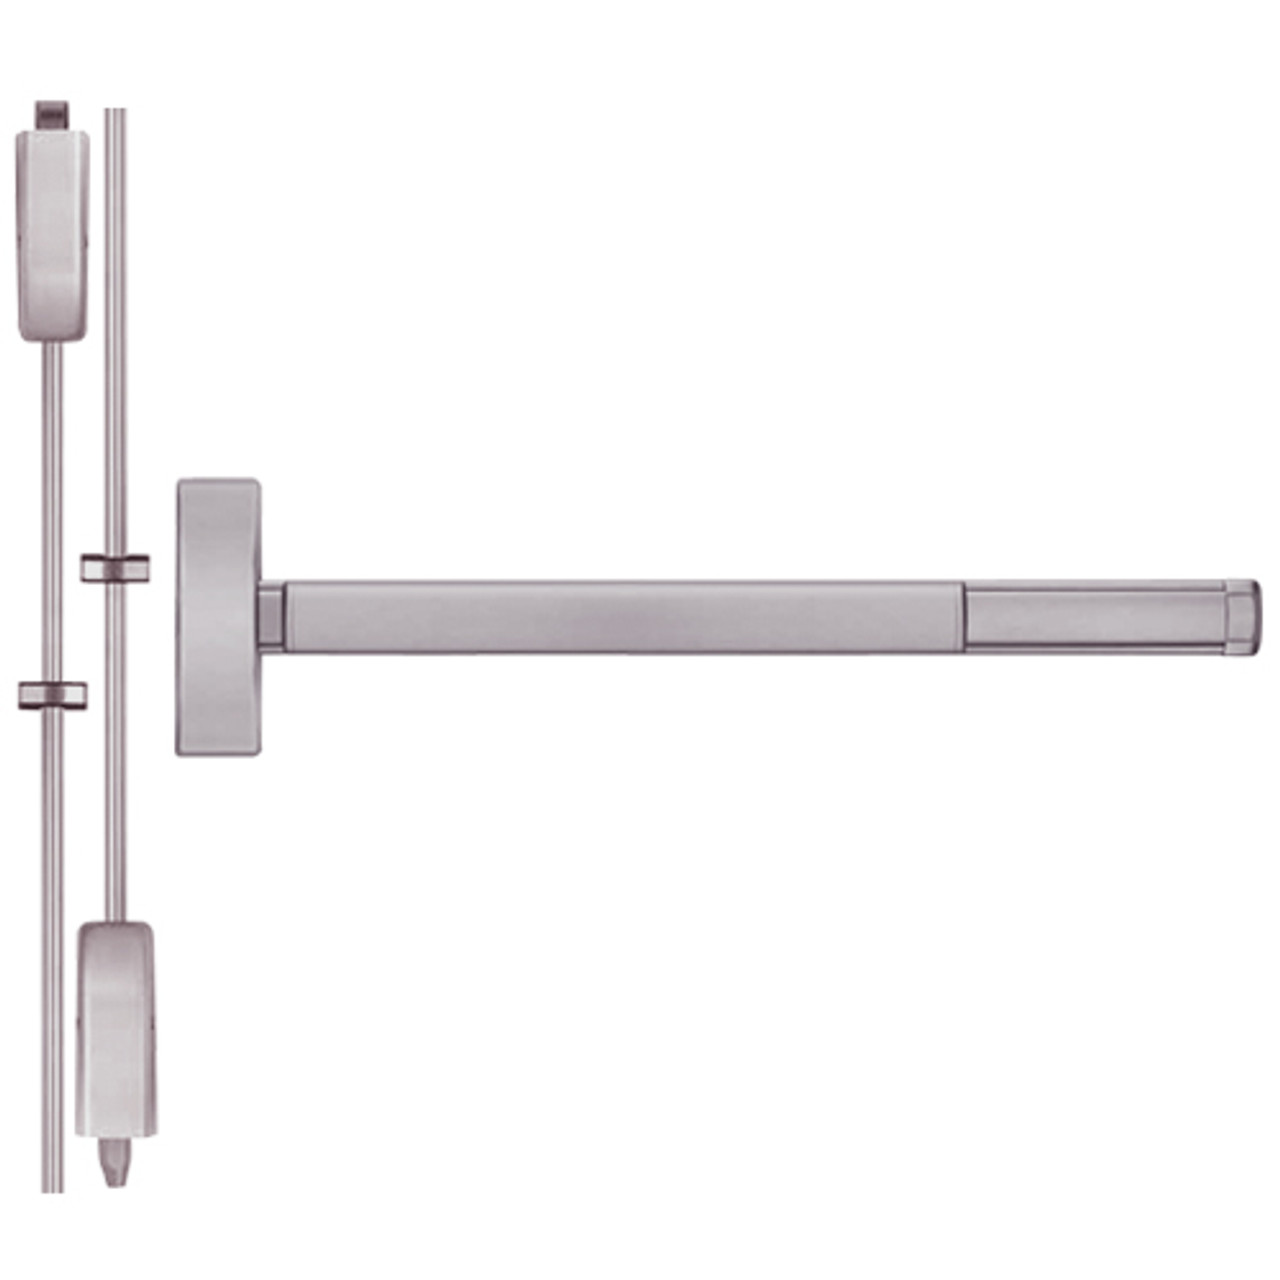 TS2214-630-36 PHI 2200 Series Non Fire Rated Apex Surface Vertical Rod Device with Touchbar Monitoring Switch Prepped for Lever-Knob Always Active in Satin Stainless Steel Finish